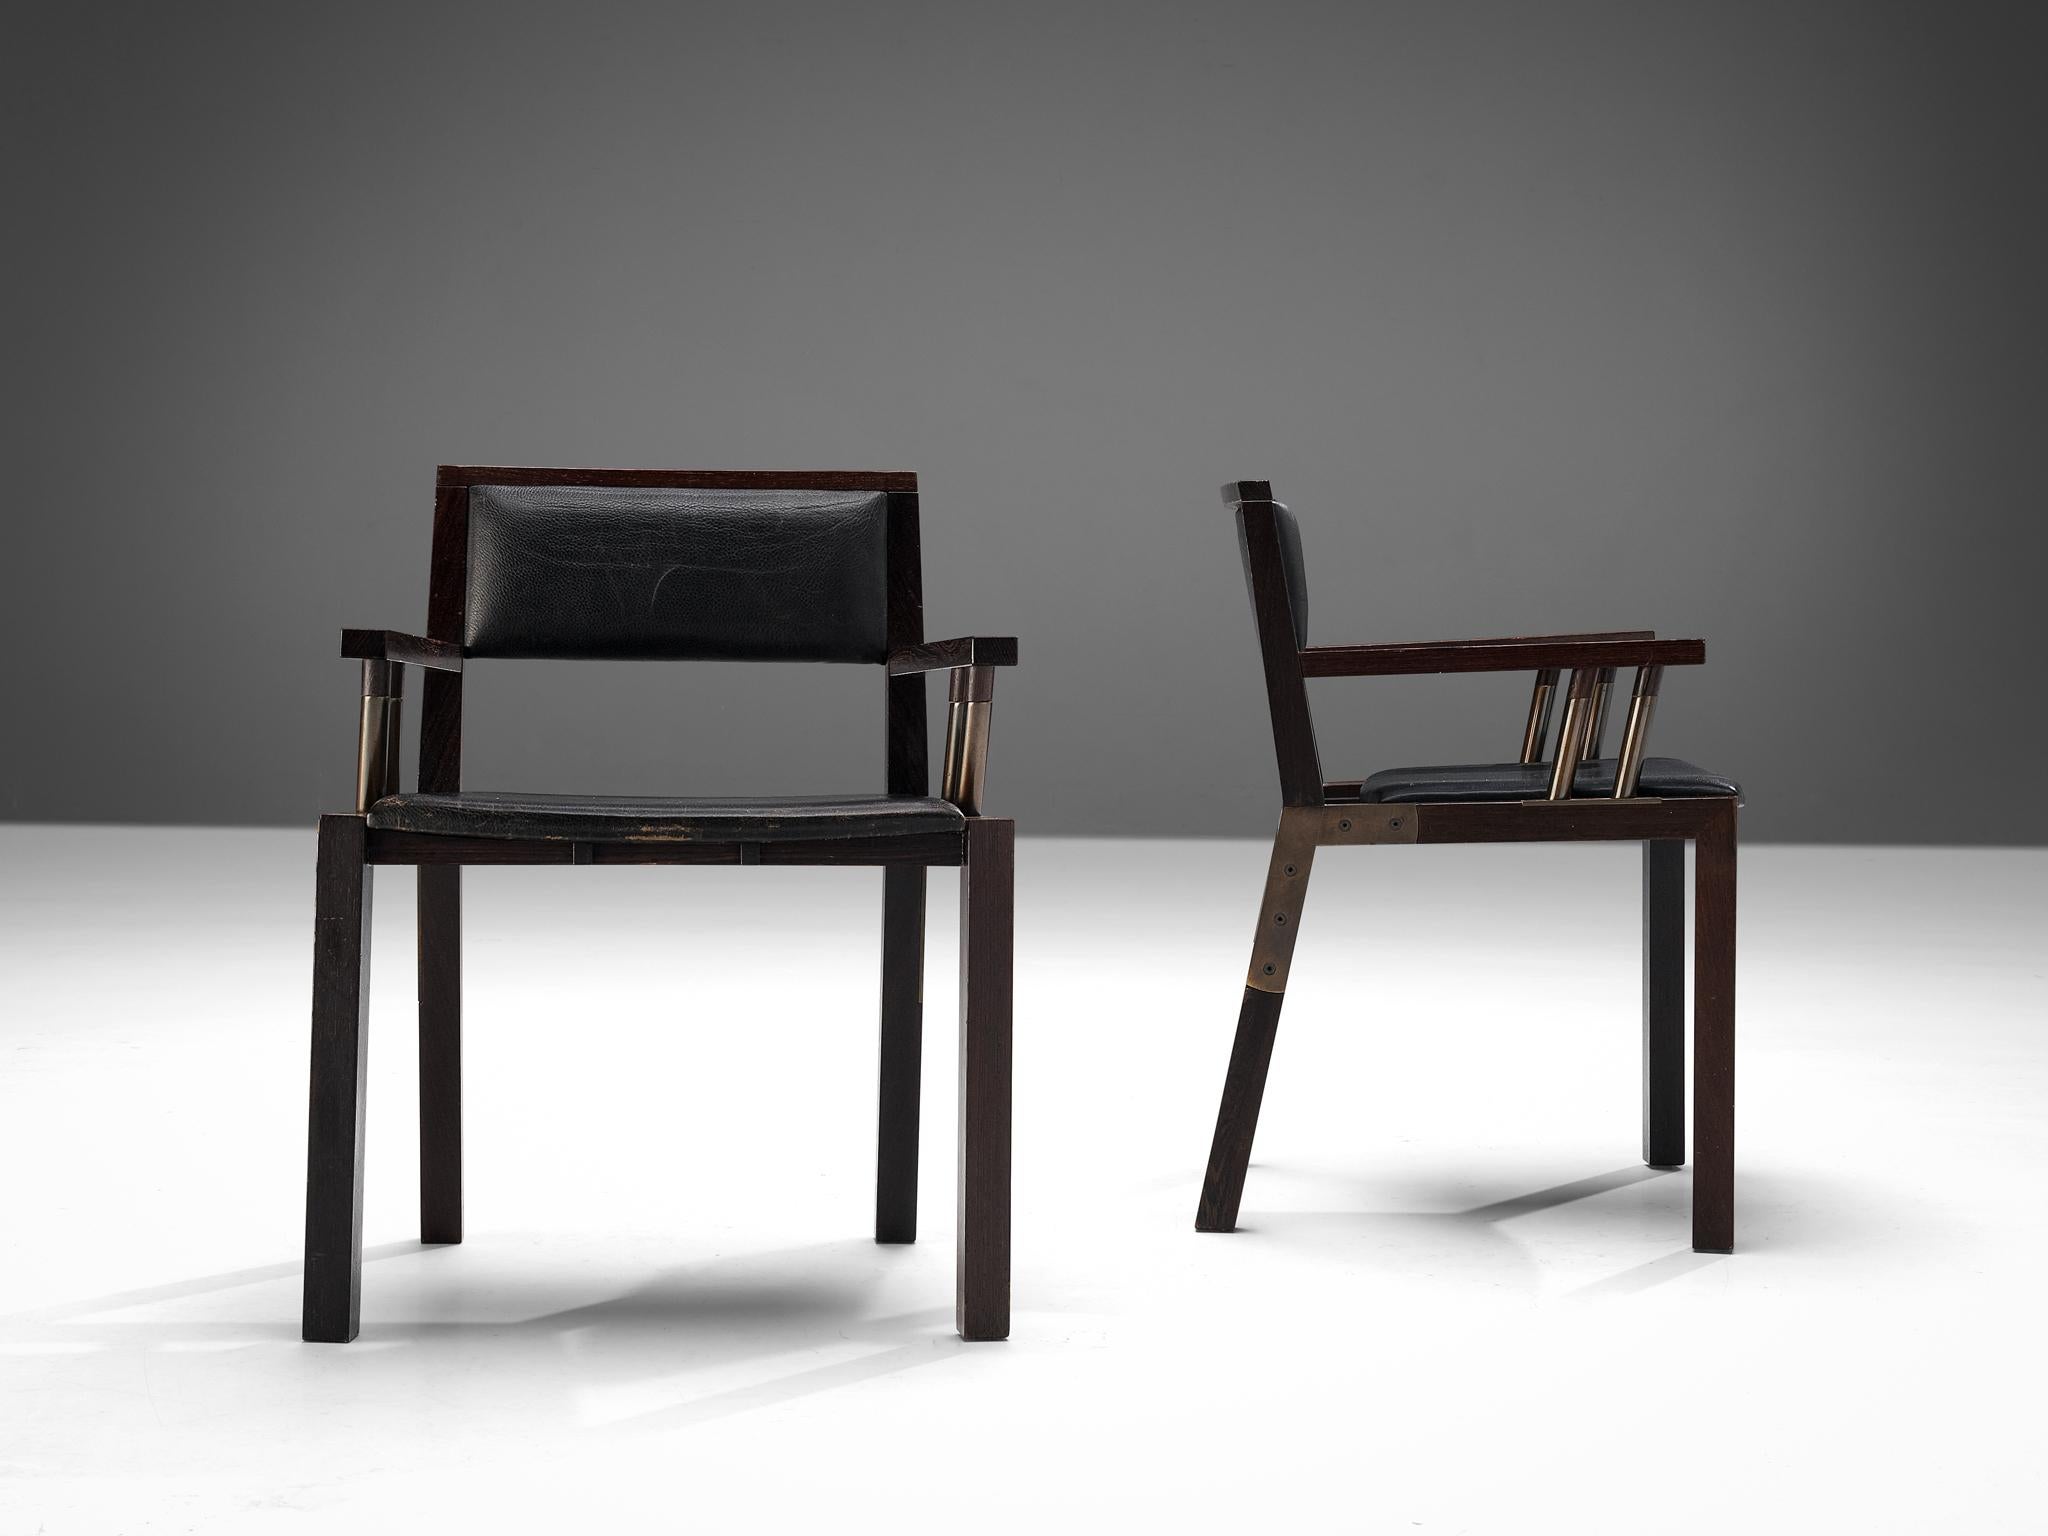 Rare Jean-Michel Wilmotte ‘Grand Louvre’ Set of Six Dining Chairs in Wenge  For Sale 2